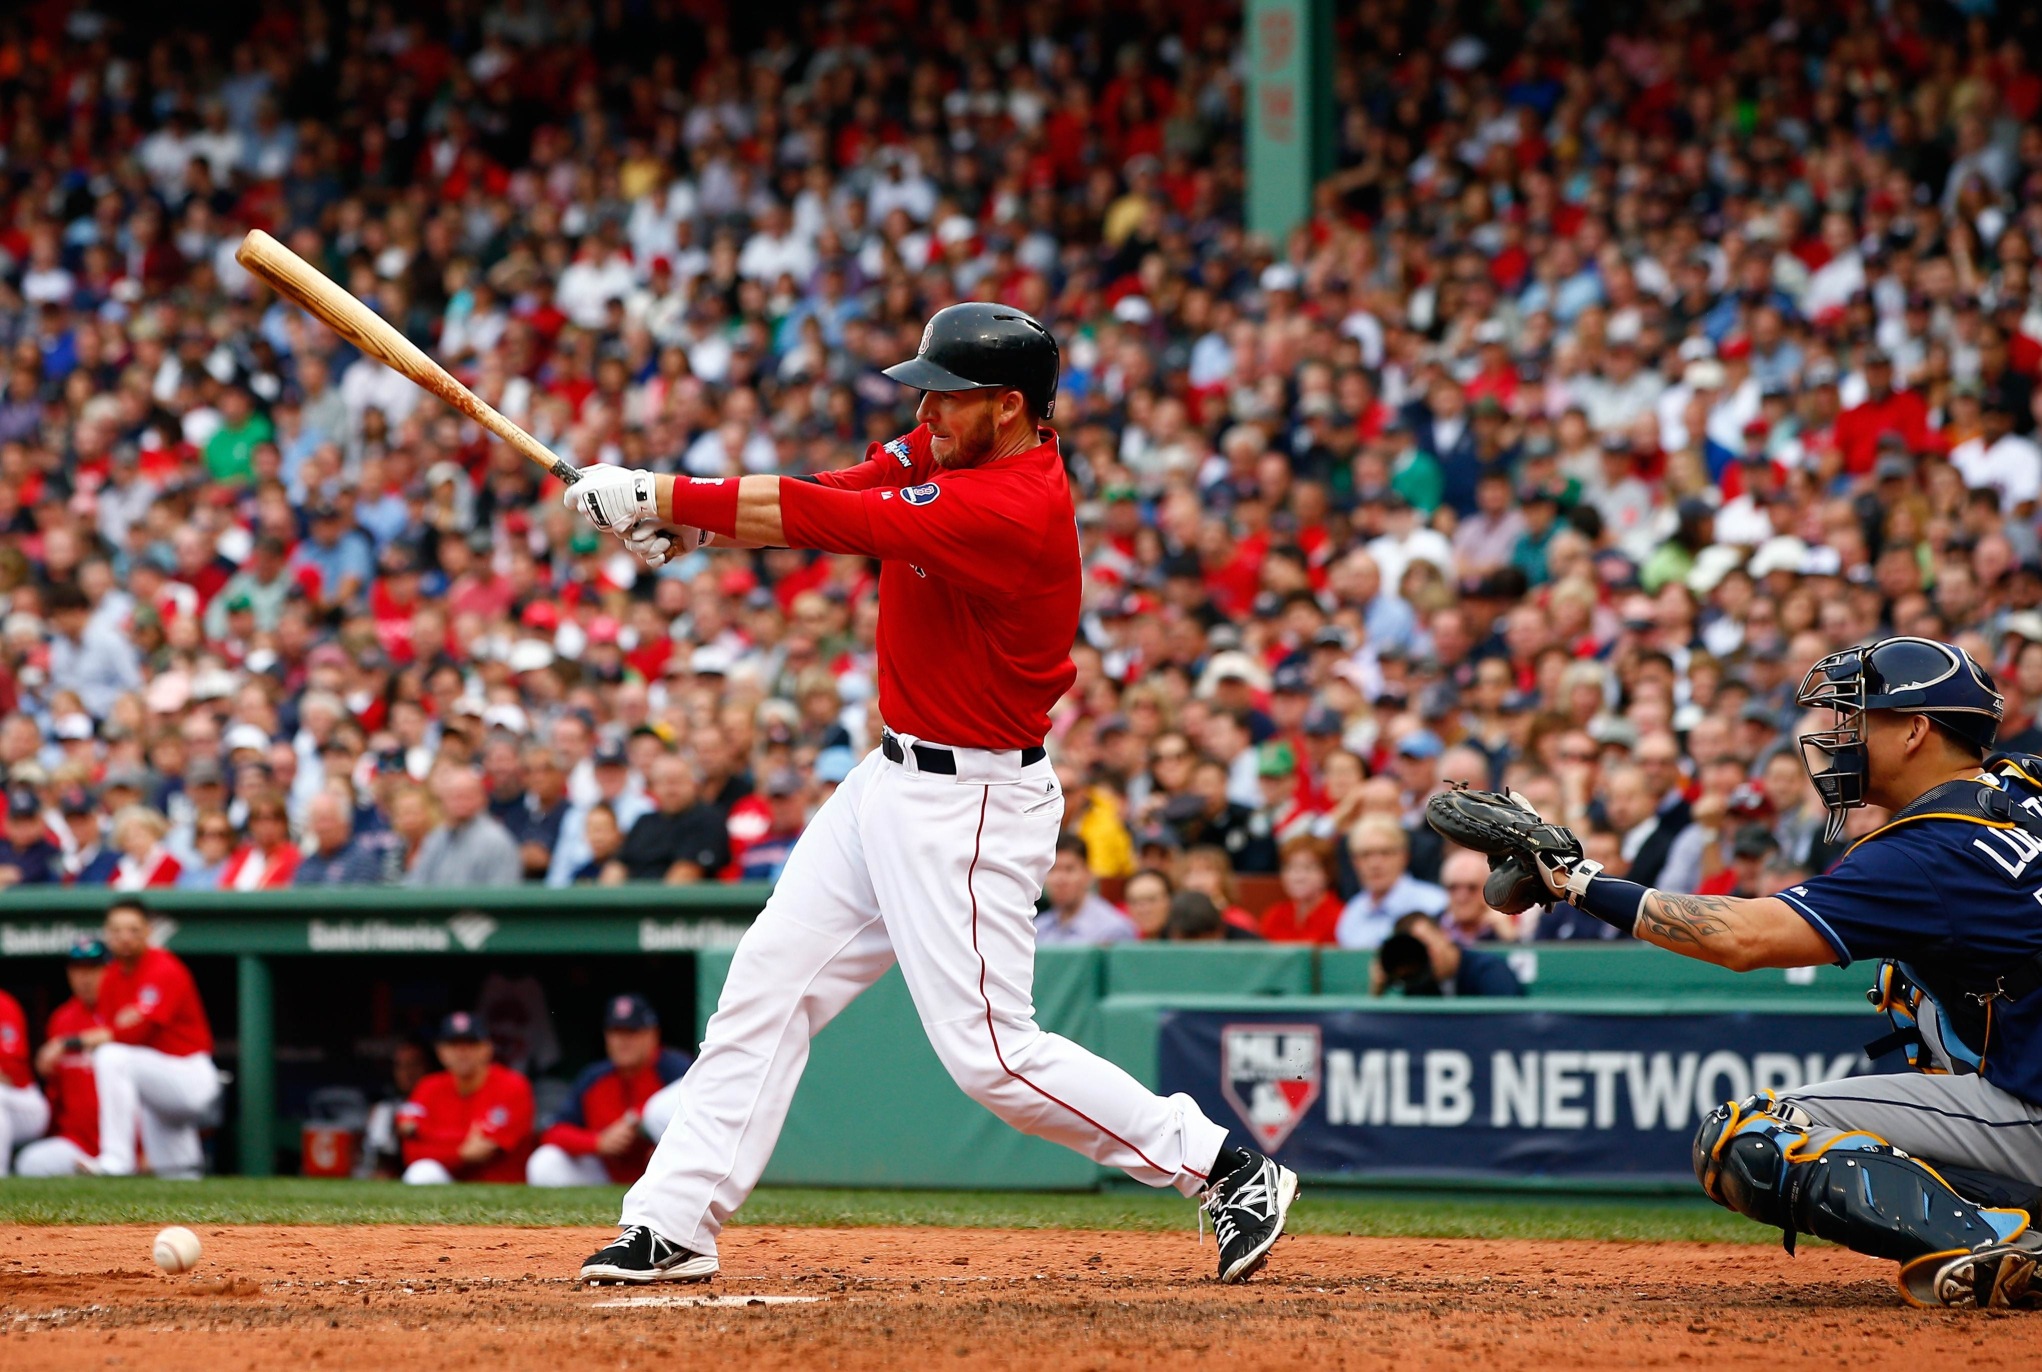 Stephen Drew of the Boston Red Sox hitting against the Tampa Bay Rays at Fenway Park on Friday. Photo: AFP 